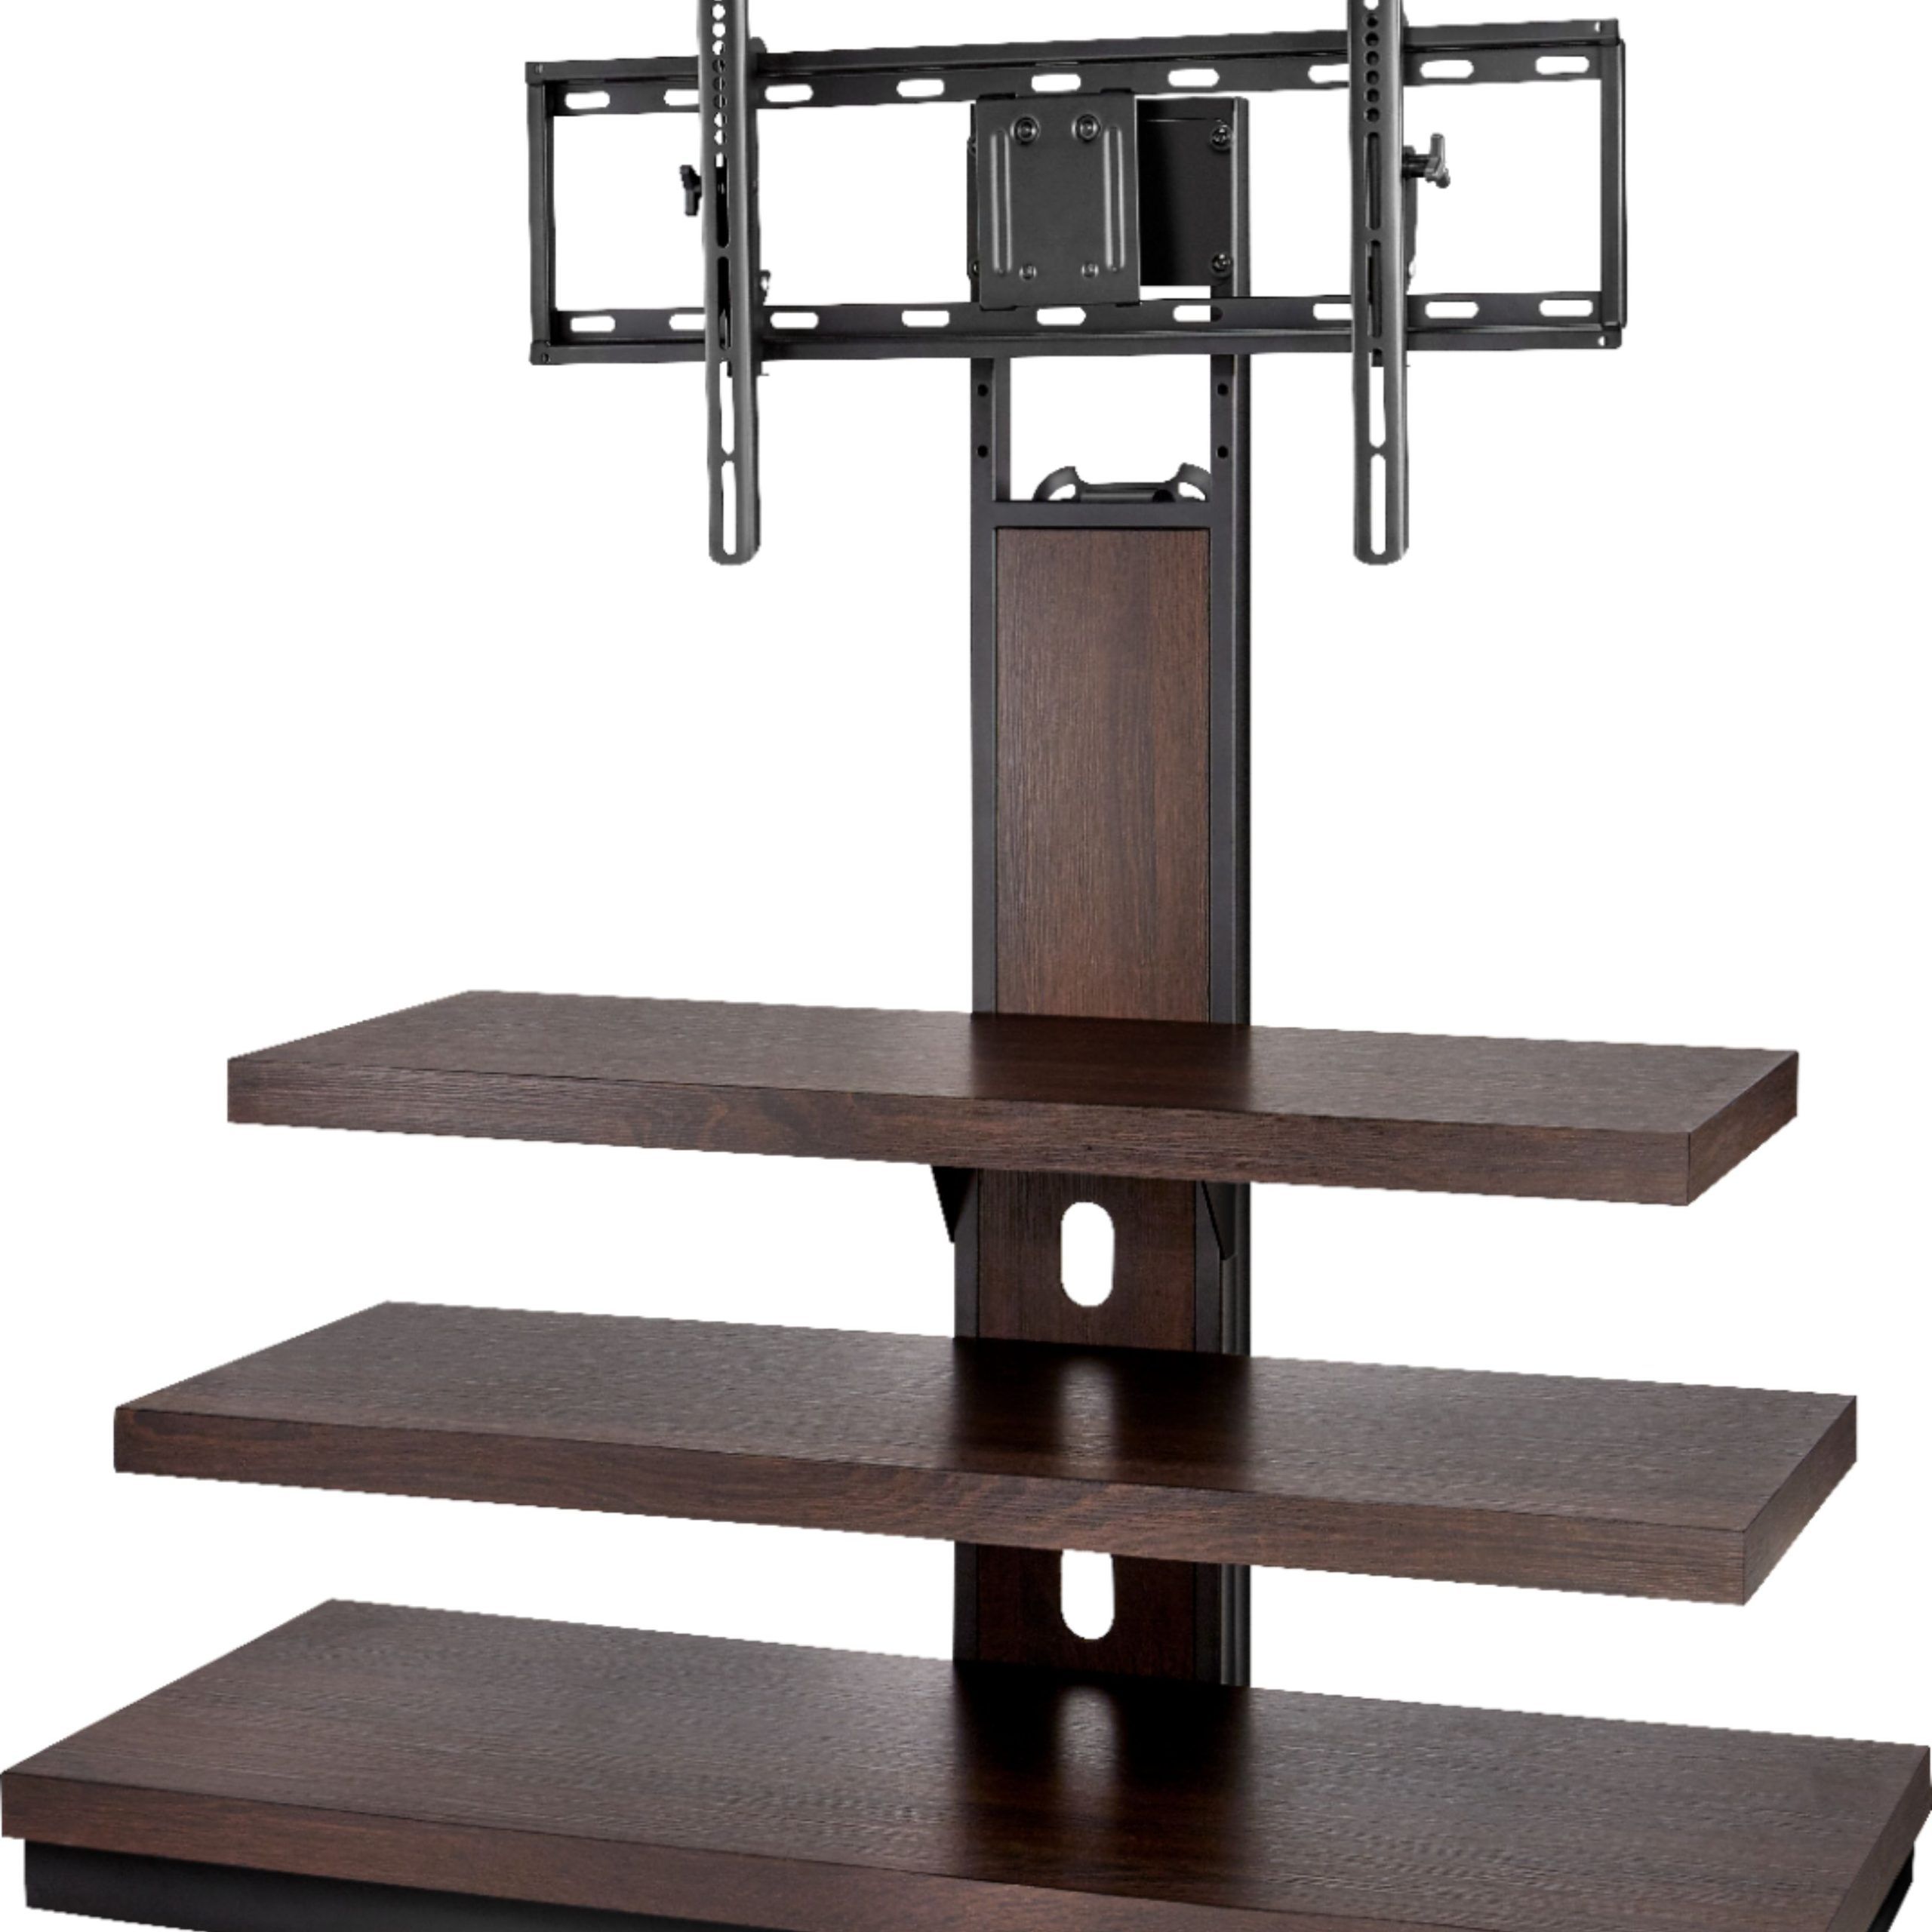 Best Buy: Insignia™ Tv Stand For Most Flat Panel Tvs Up To 55" Dark Brown  Ns Hwmc1848 For Top Shelf Mount Tv Stands (View 2 of 15)